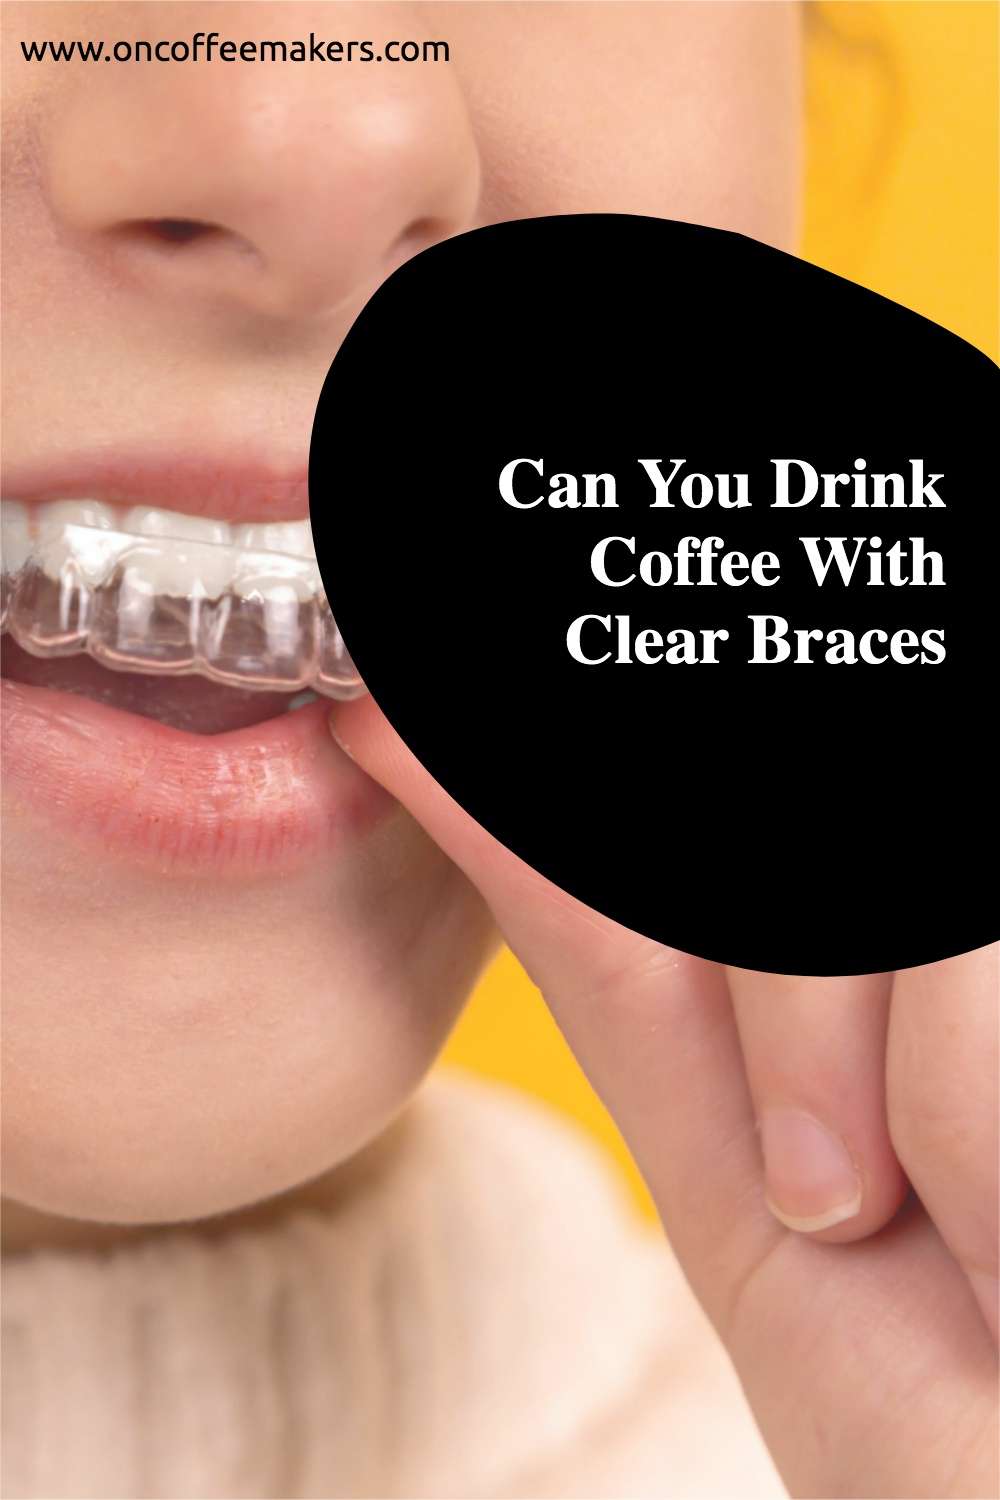 Can You Drink Coffee With Clear Braces